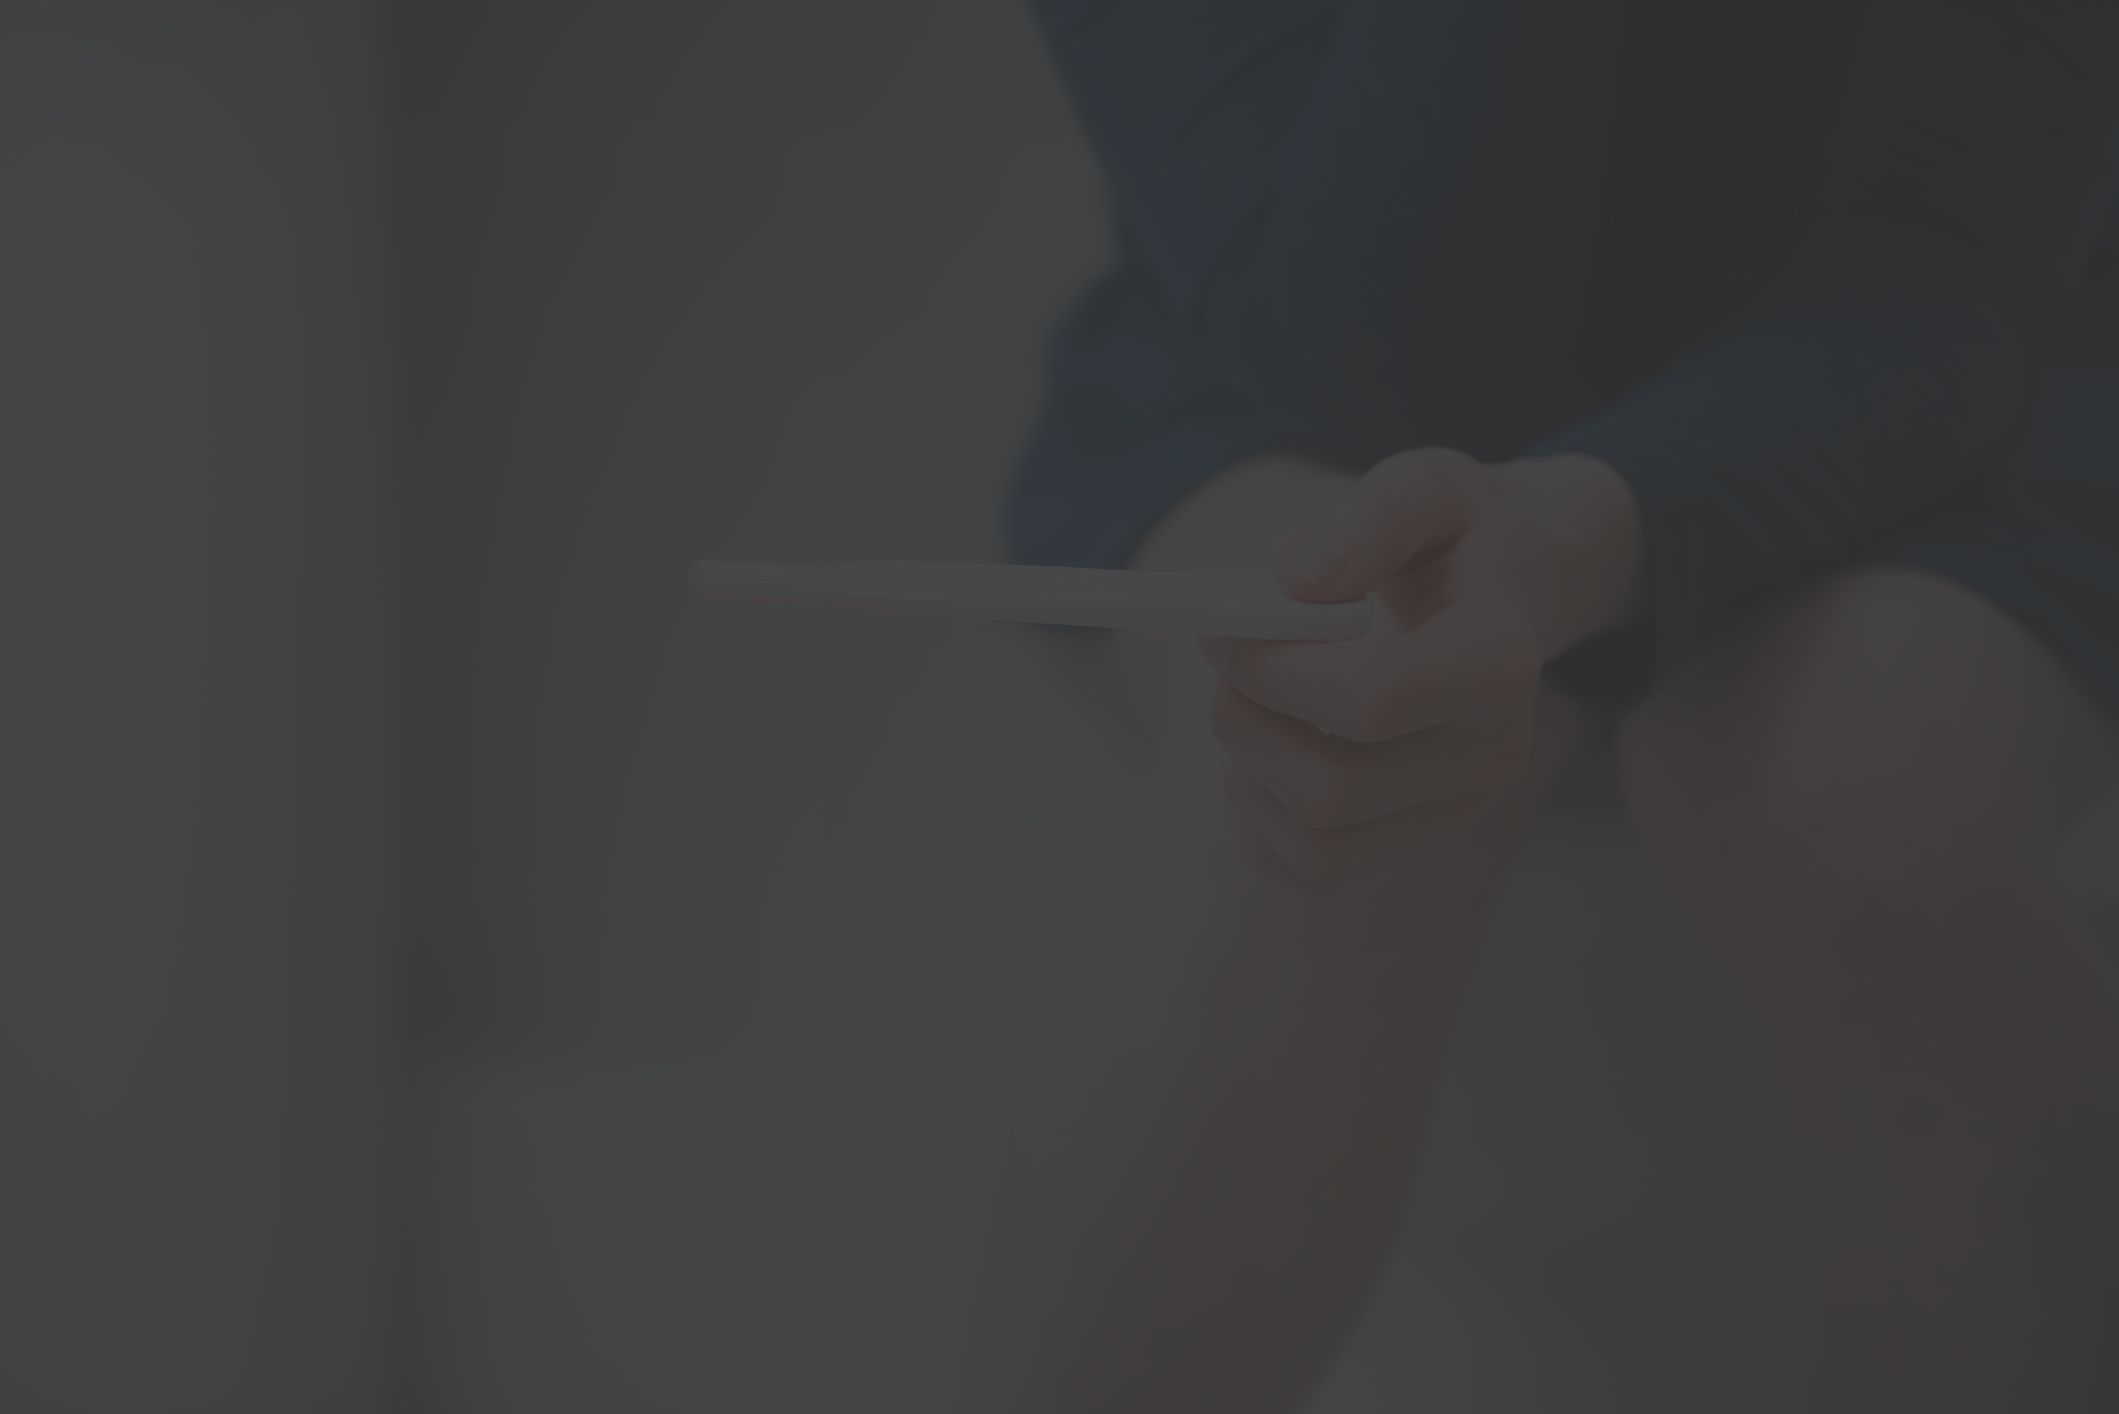 Lower legs of someone sitting on a toilet and holding a home pregnancy test